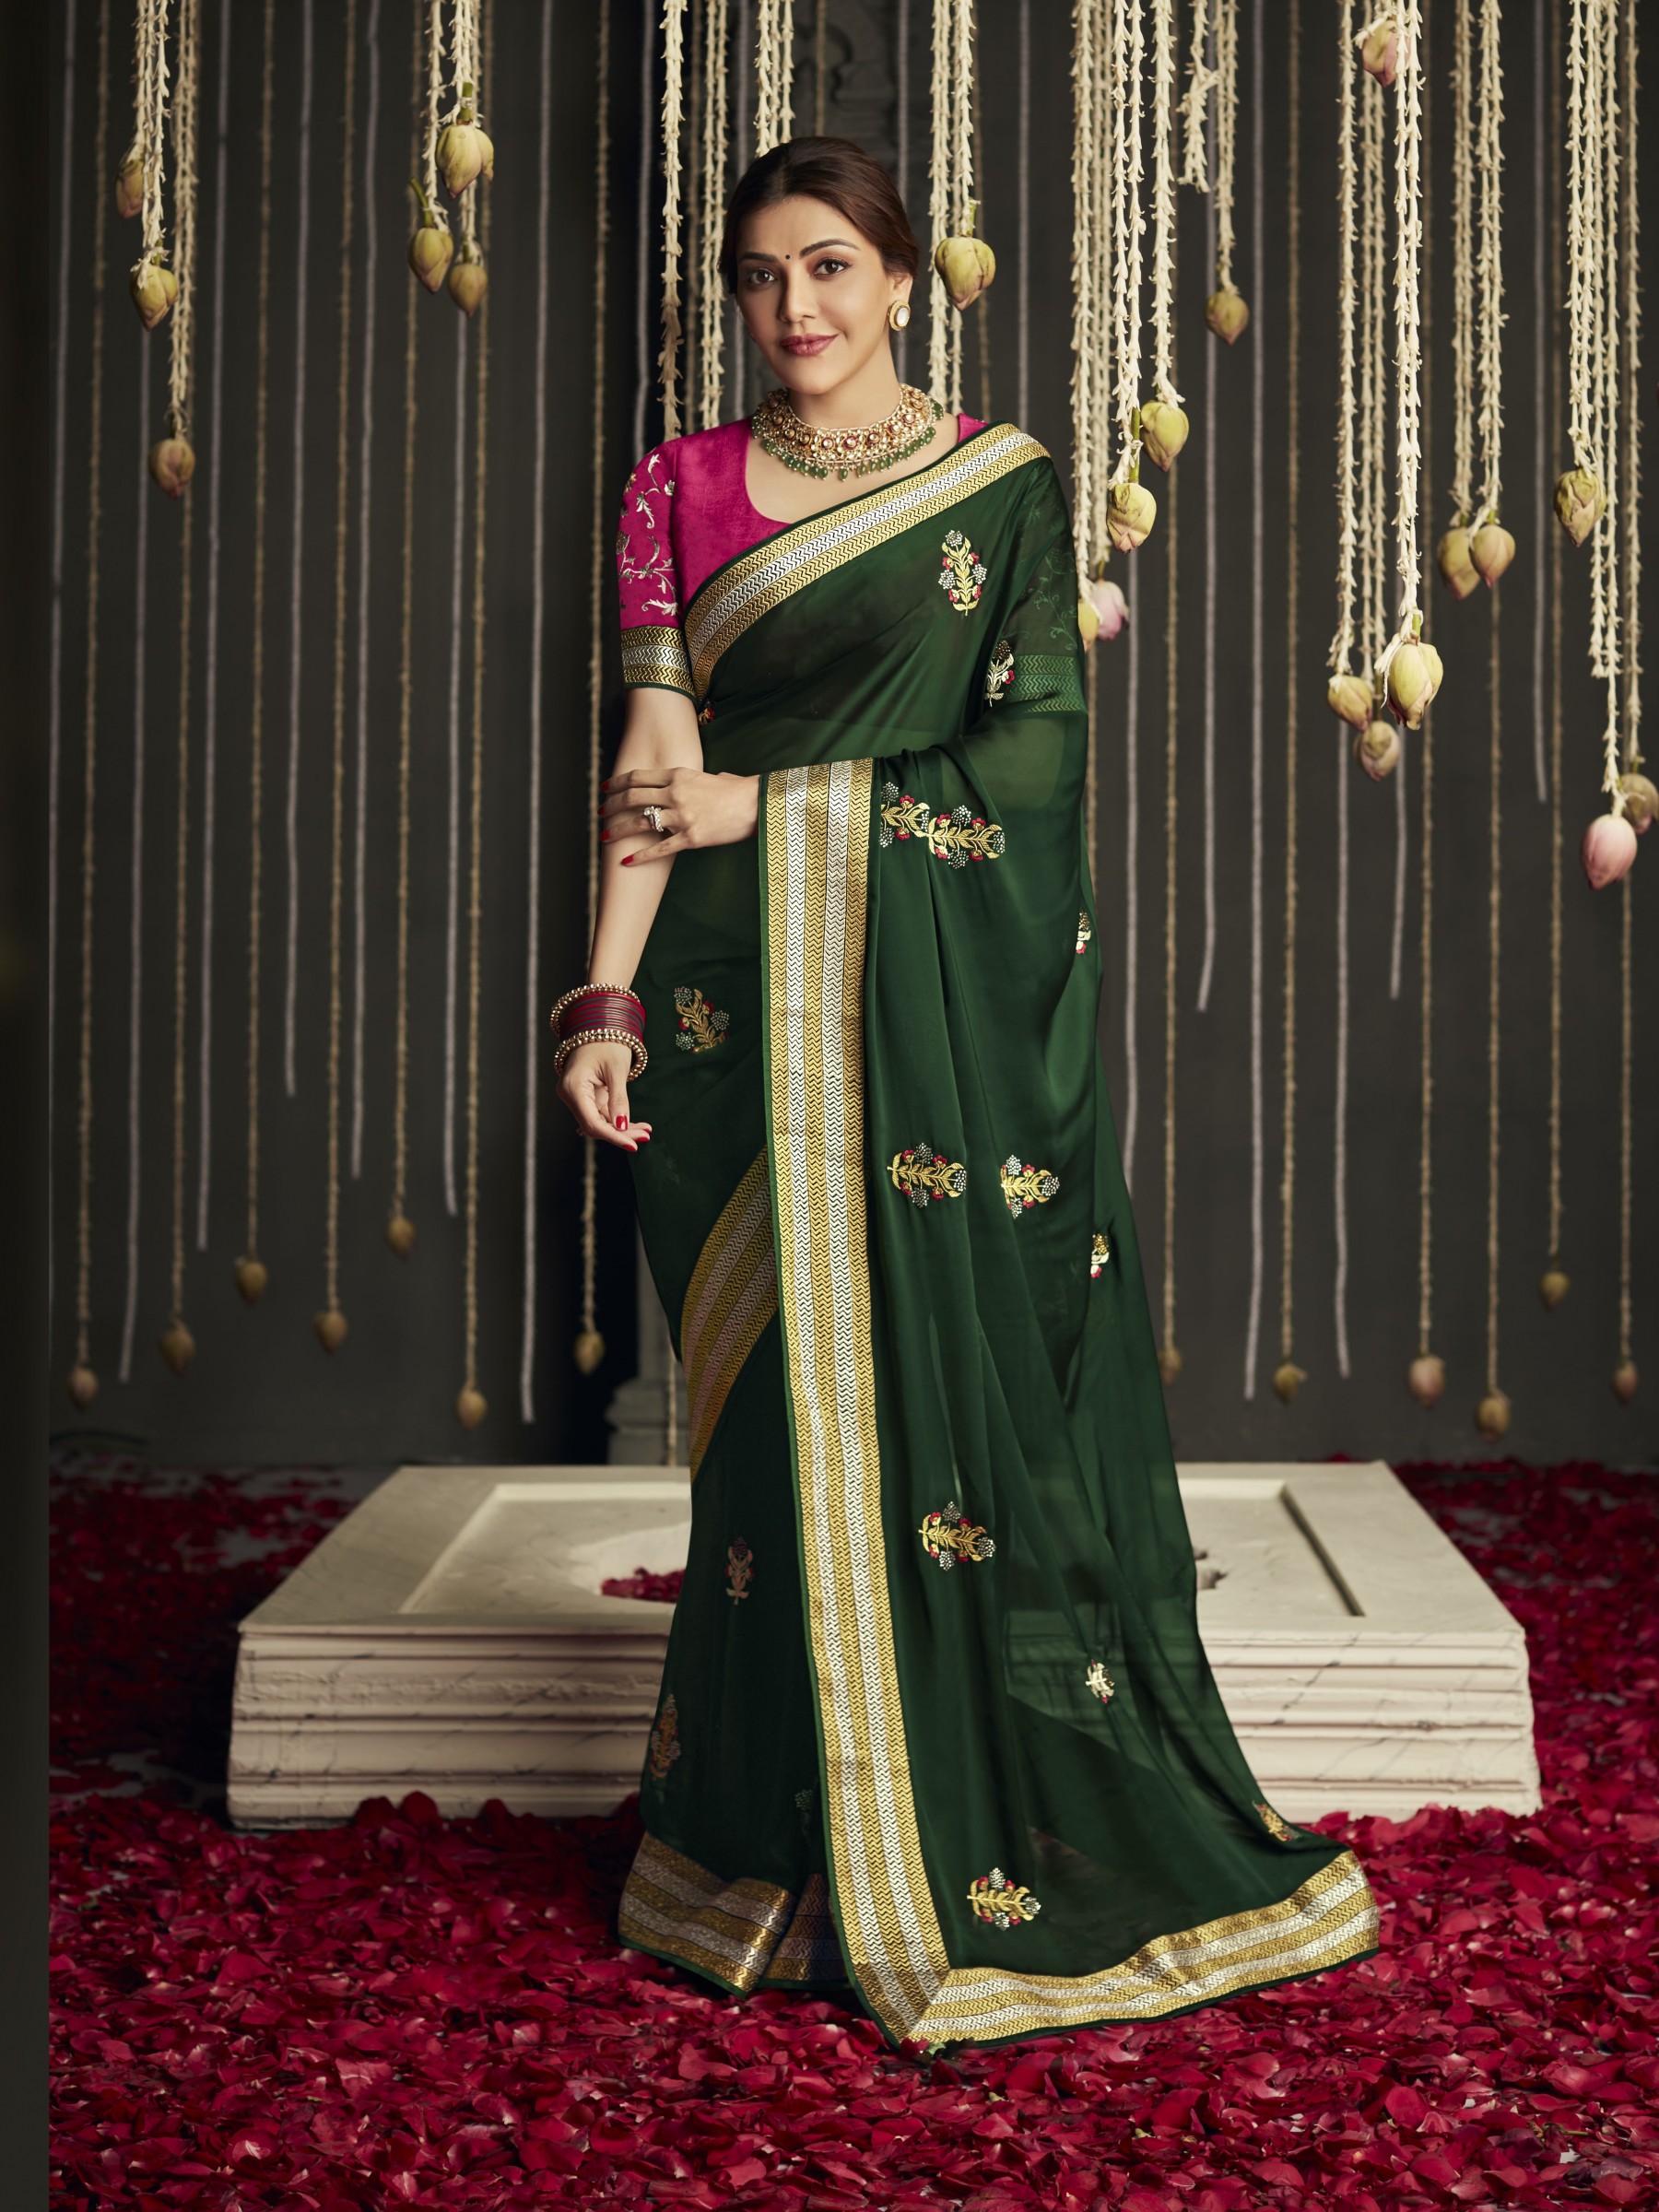 Fansy Silk Saree In Green Color With Embroidery Work